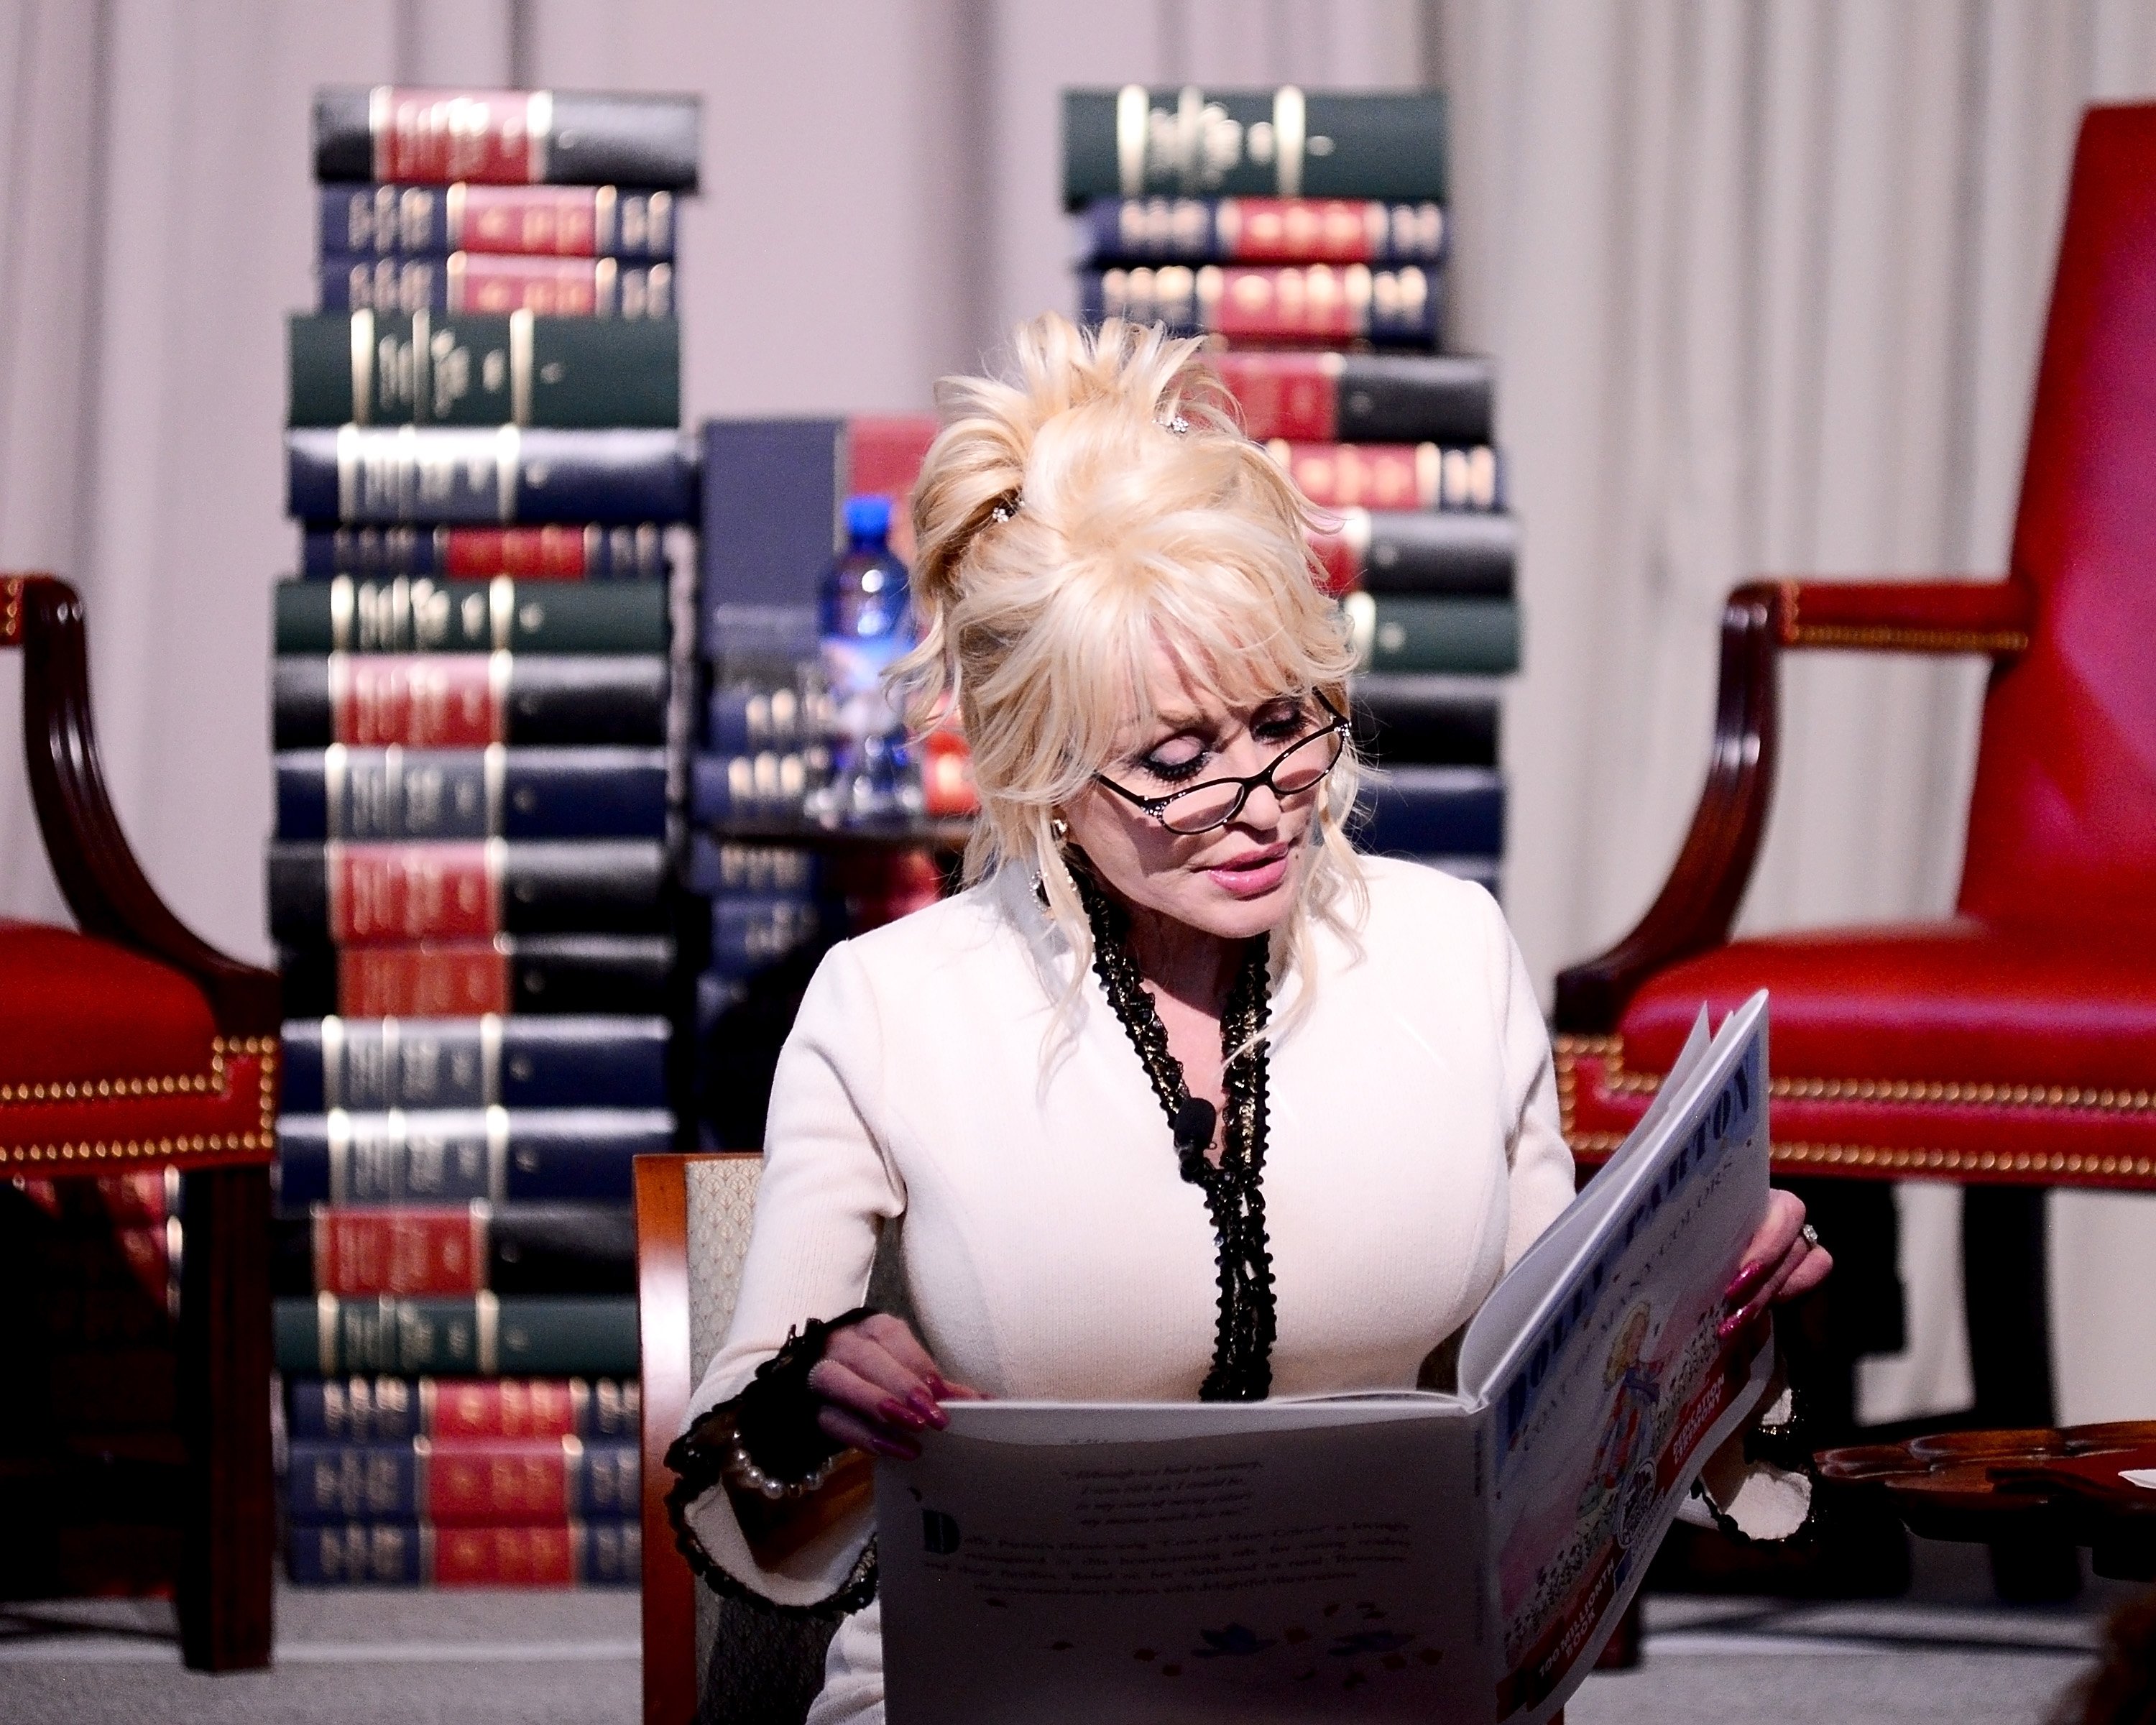 Dolly Parton sits in front of stacks of books and reads from a children's book.